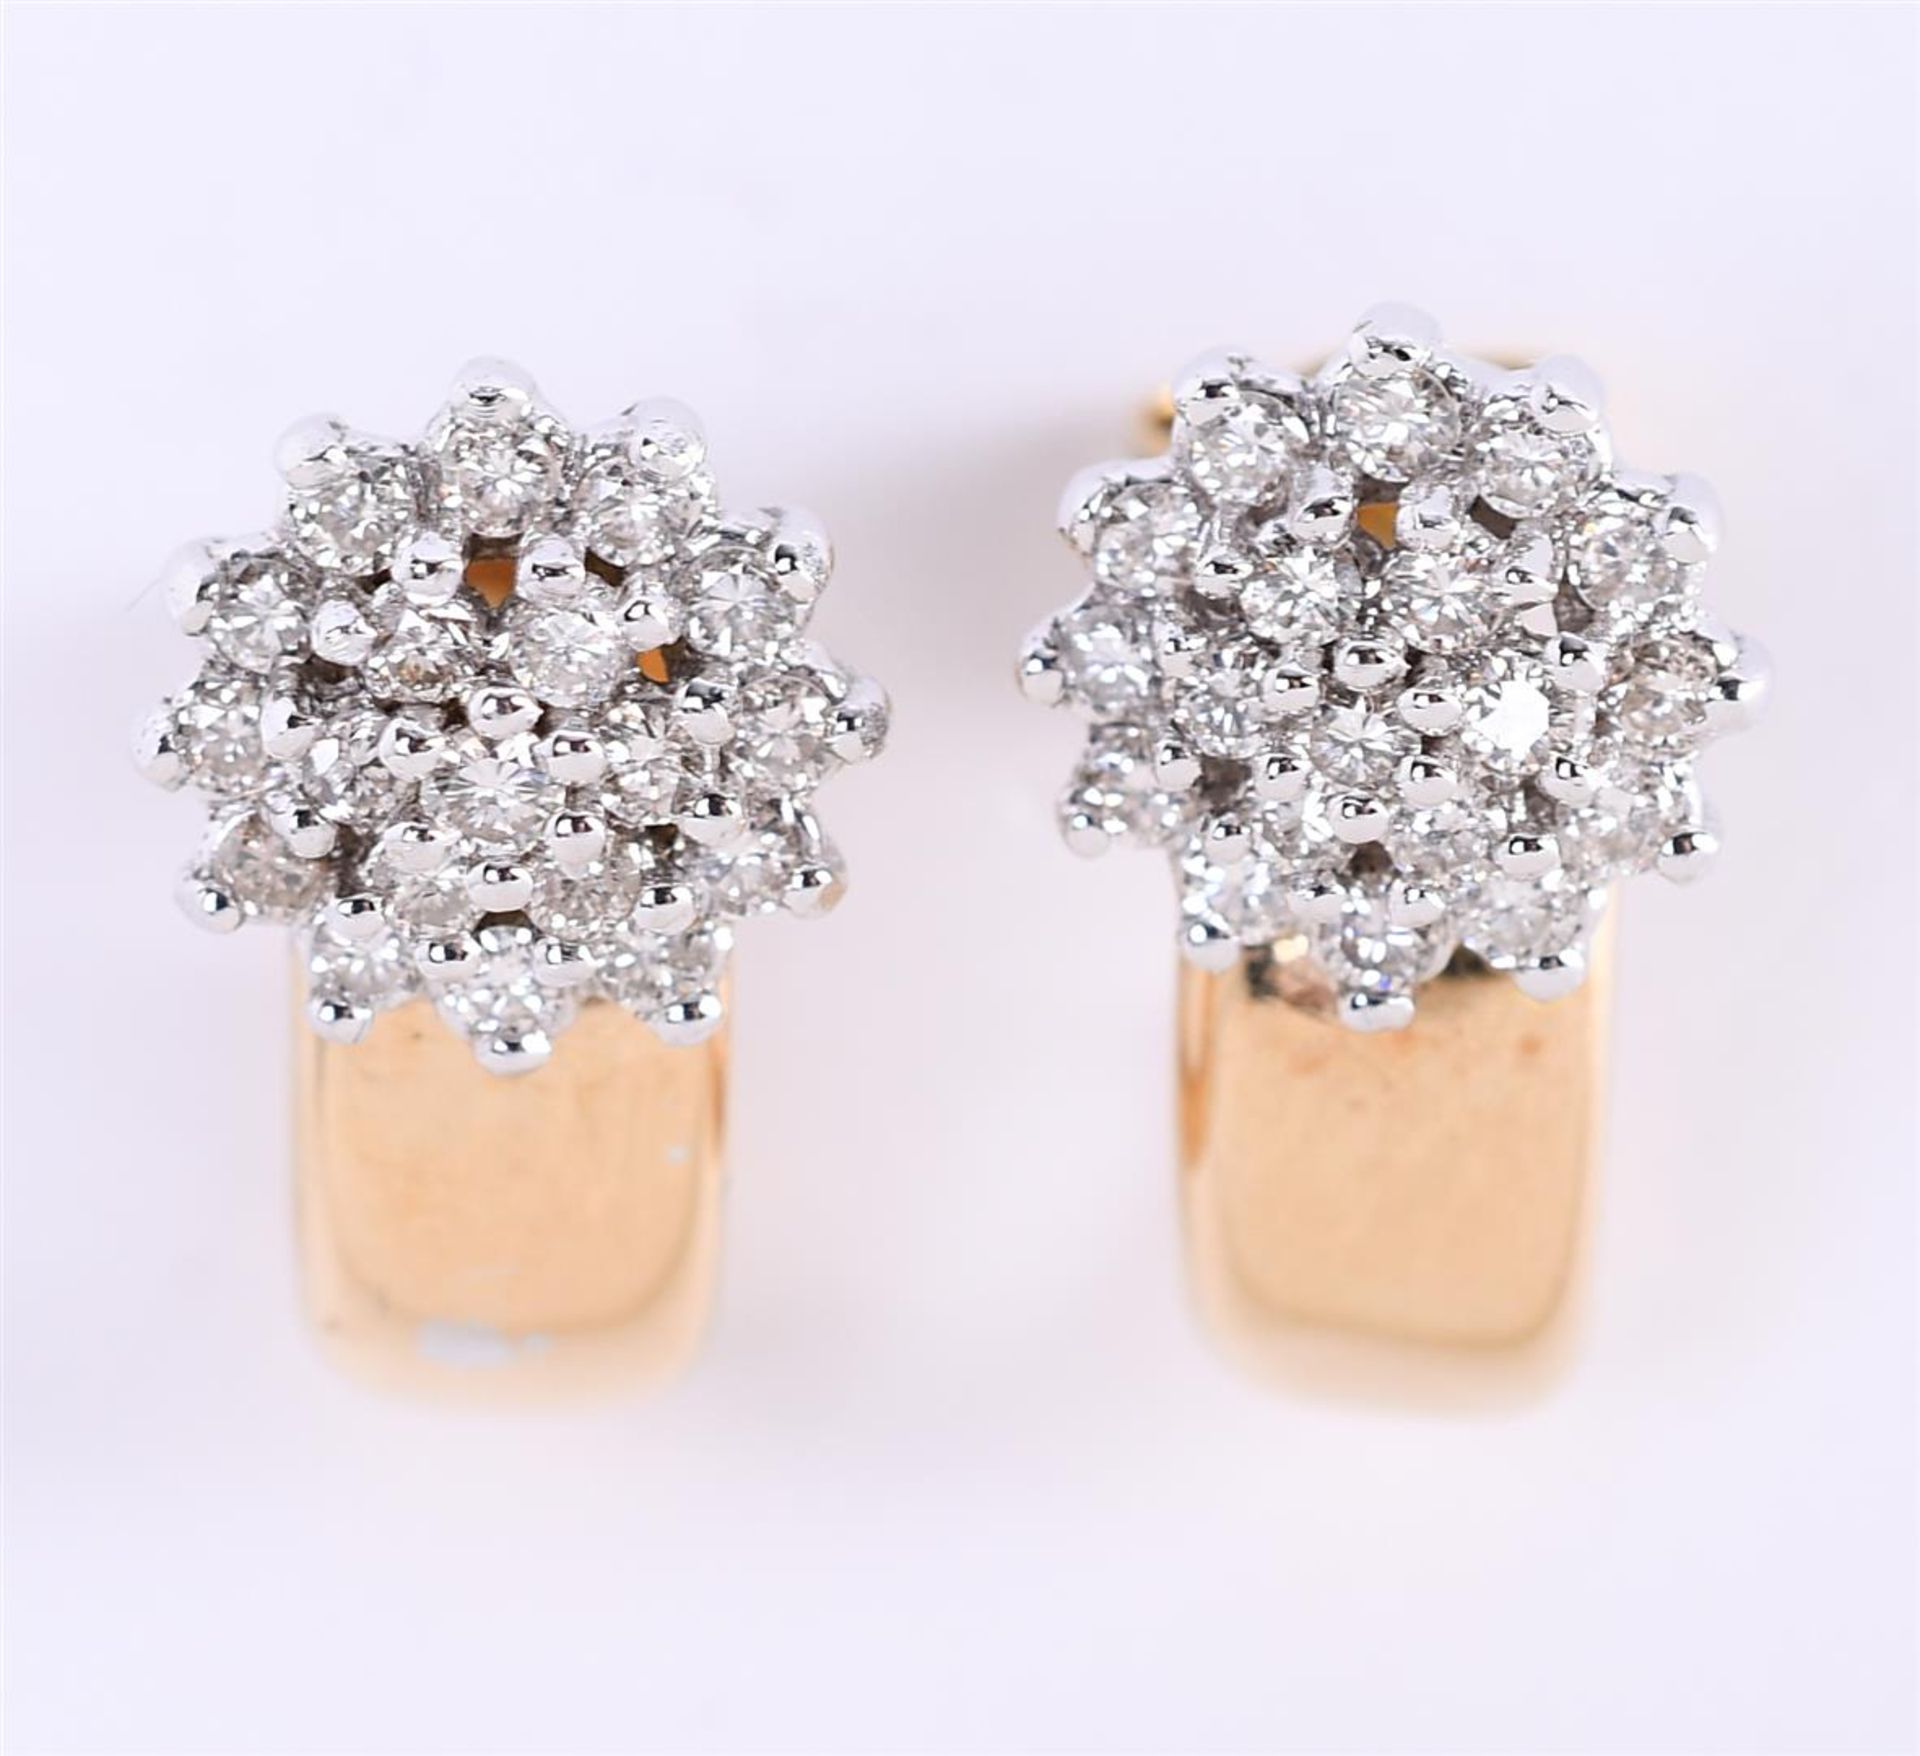 14 carat bicolor gold ladies' cluster earrings, the diamonds are set in a white gold